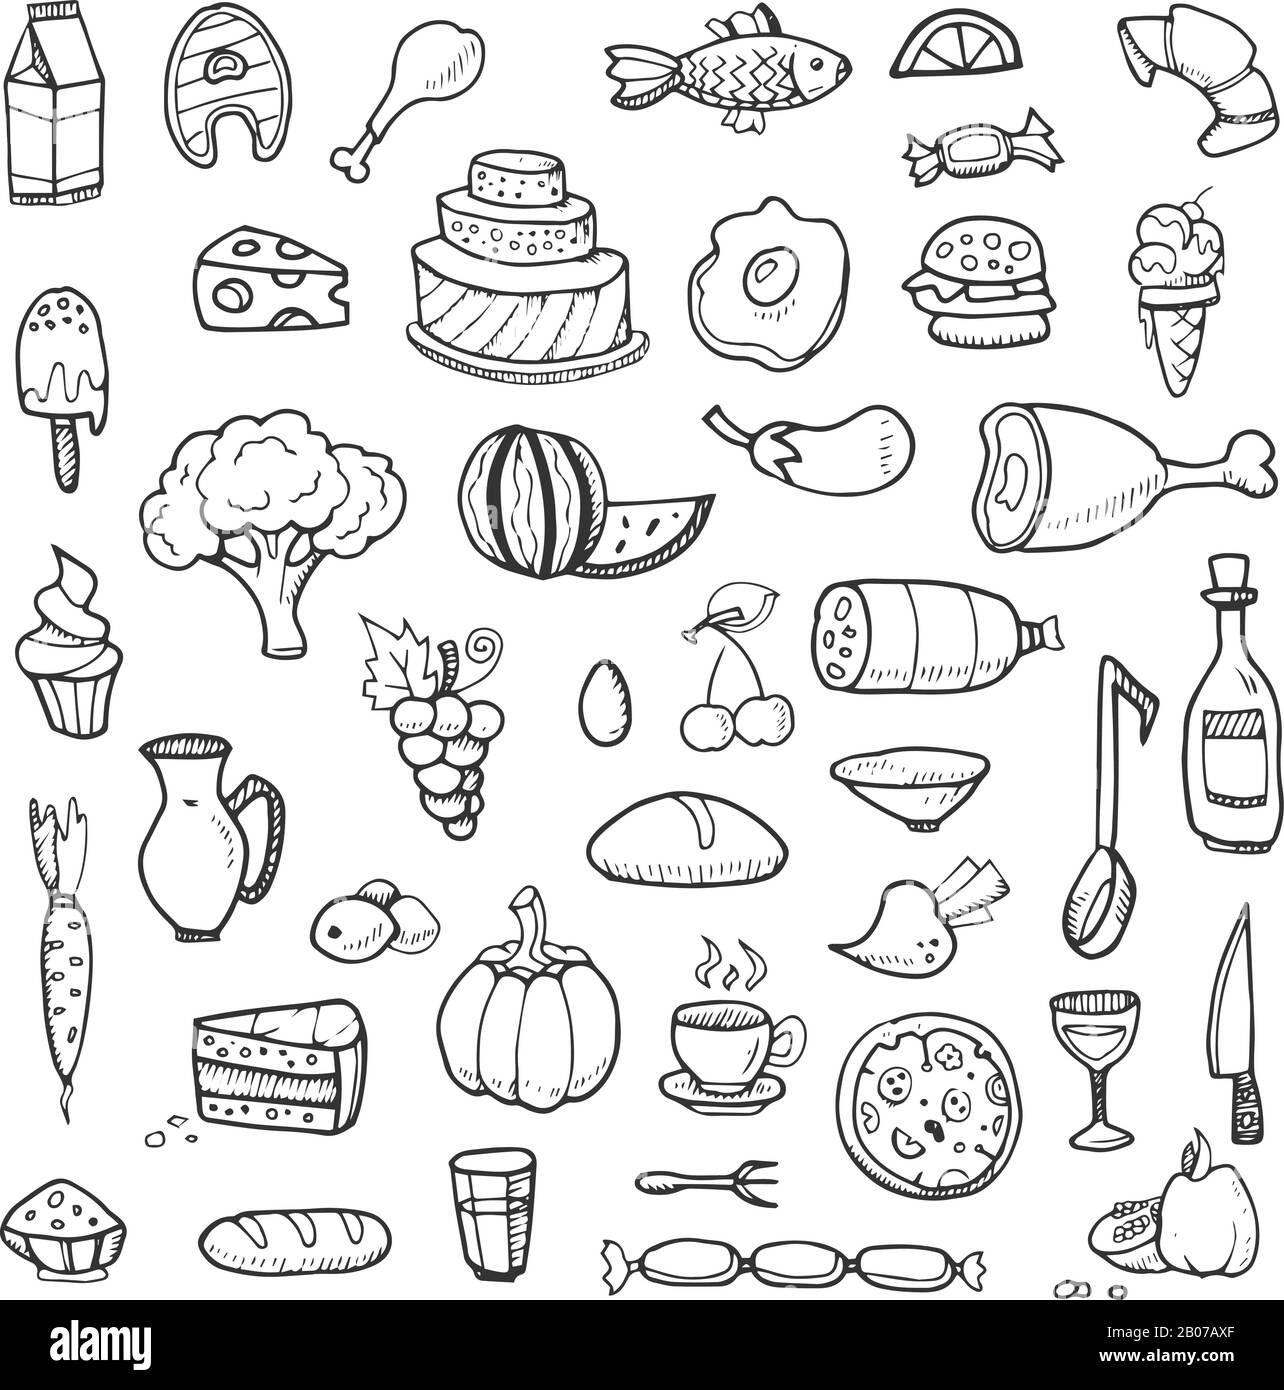 Food, vegetables, drinks, snacks, fast food doodle sketch hand drawn vector icons. Sketch drawing burger lunch and dinner illustration Stock Vector